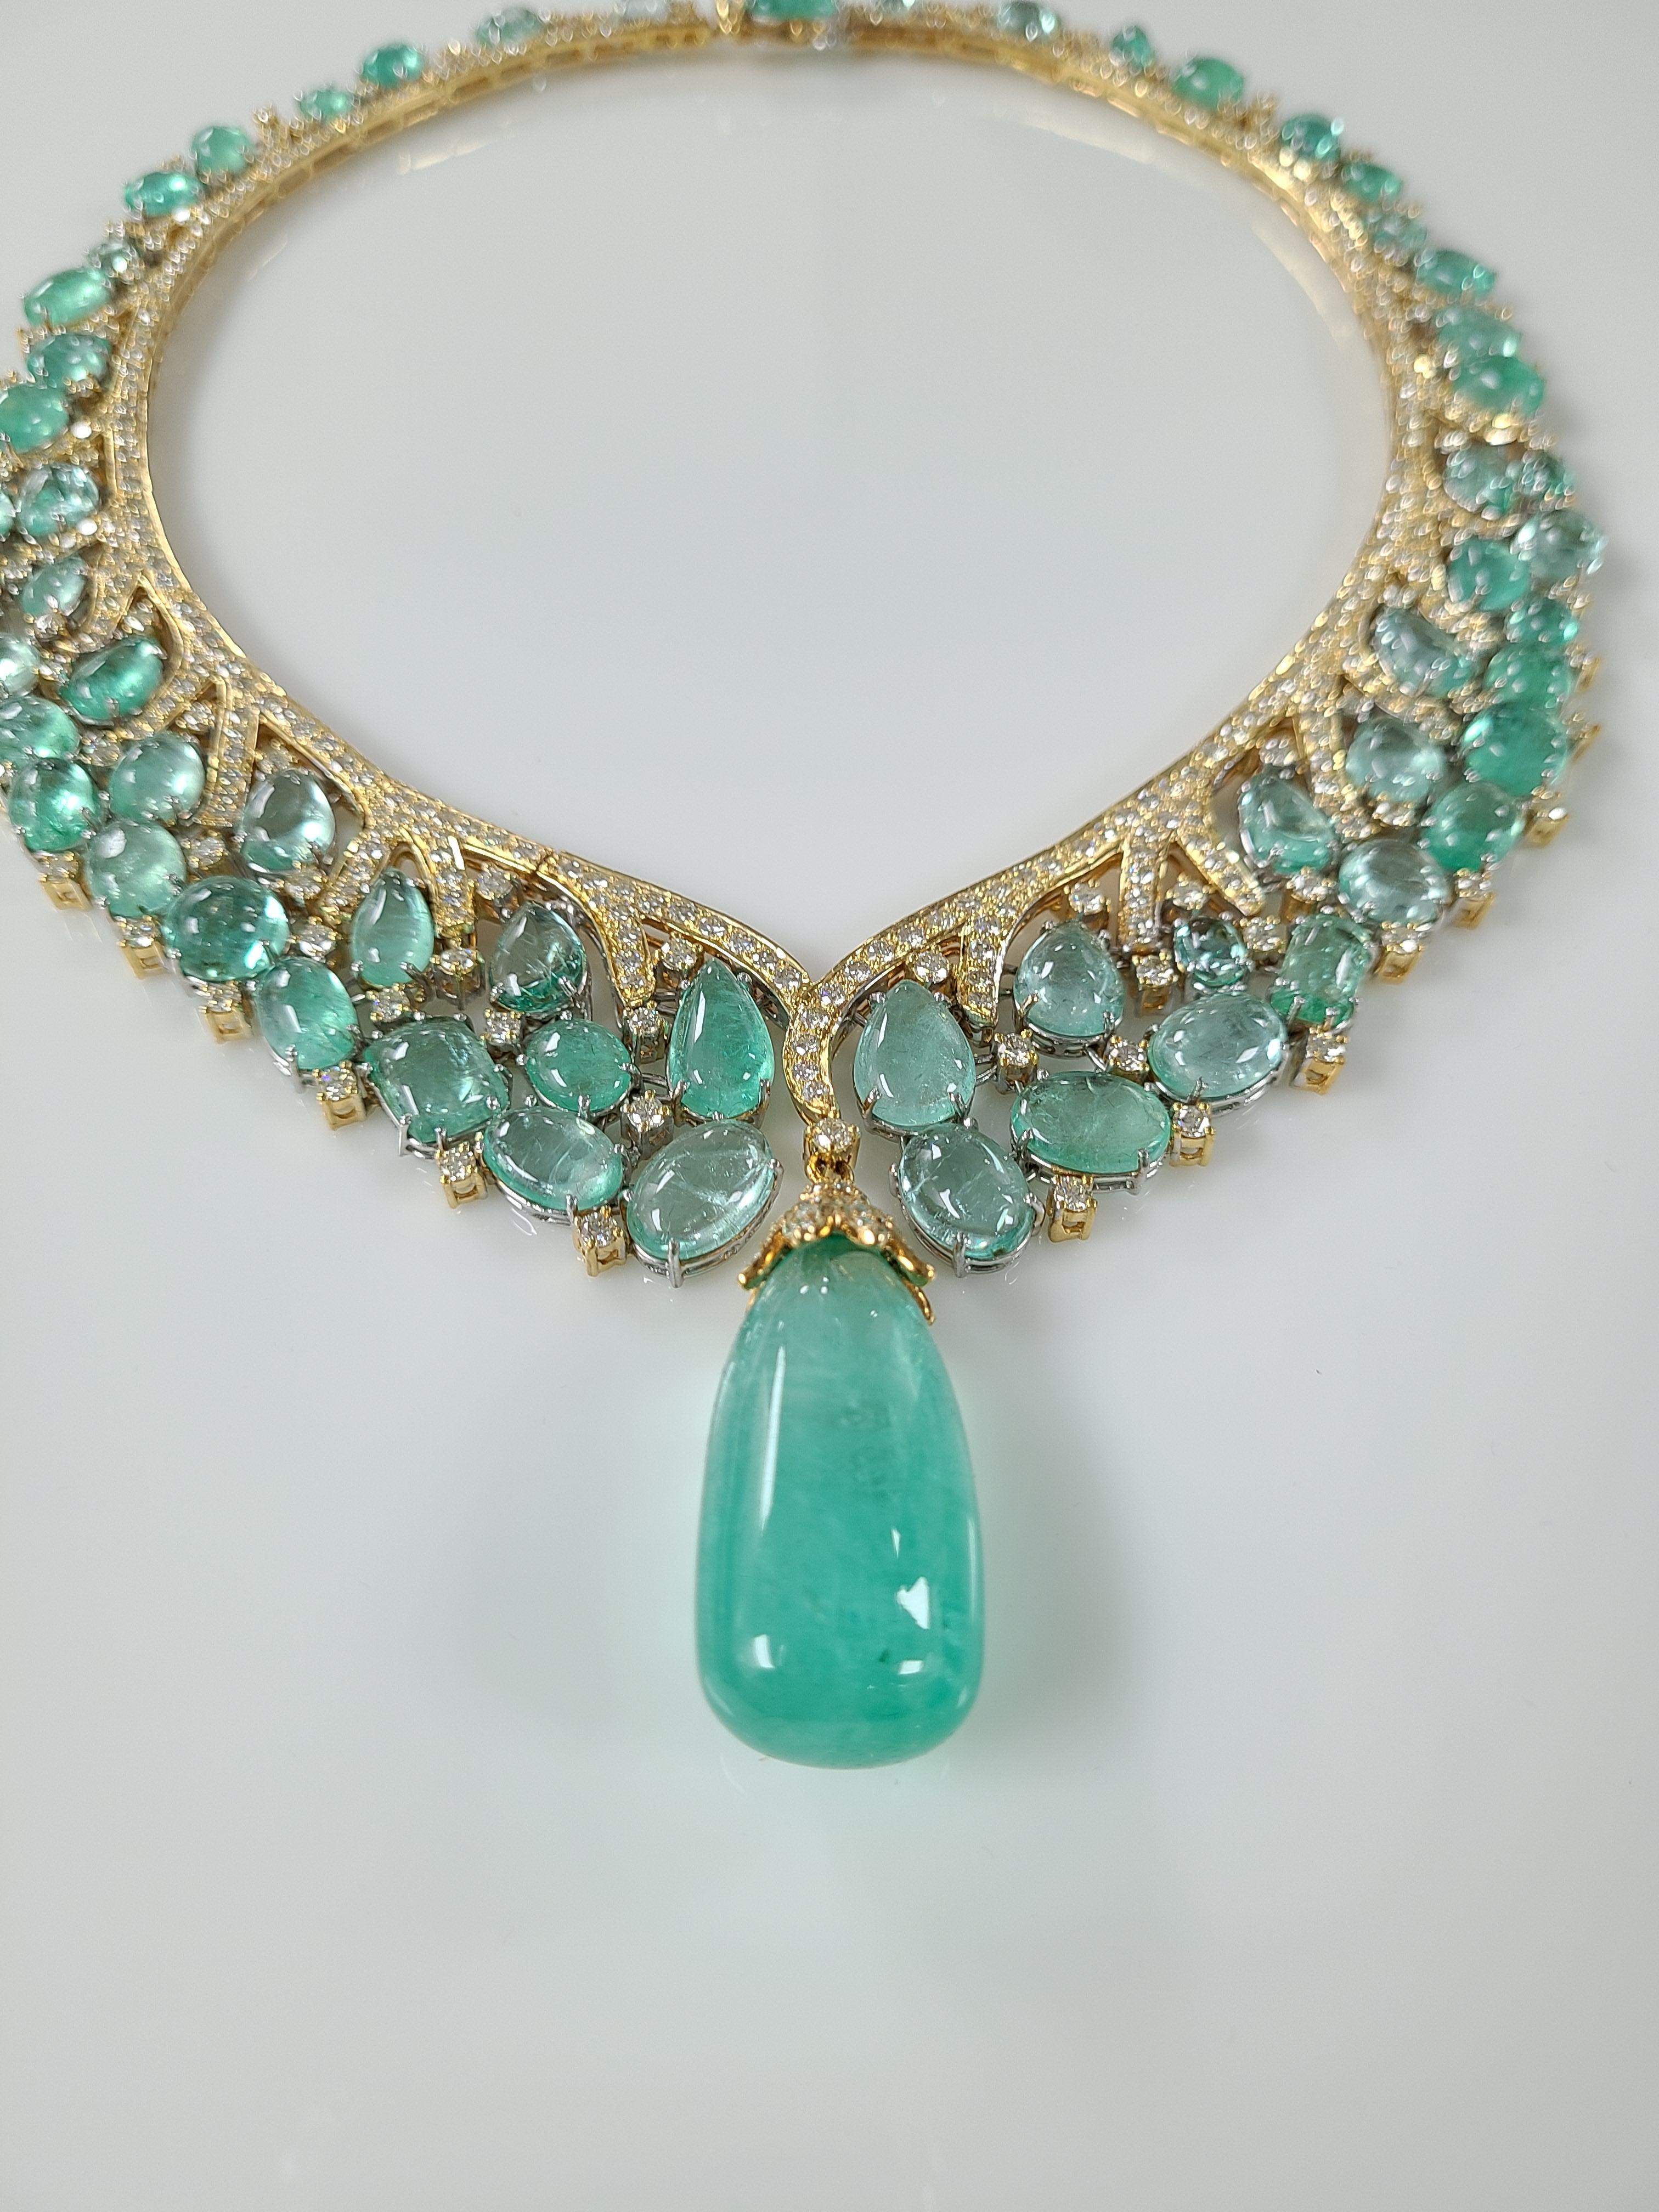 A beautiful Natural emerald set in 18k gold with diamonds. The emeralds originate from Russia . The big emerald drop weight is 61.49 carats and emerald cabochons weight is 99.04 carats. The diamond weight is 16.31 carats. The necklace length in cm